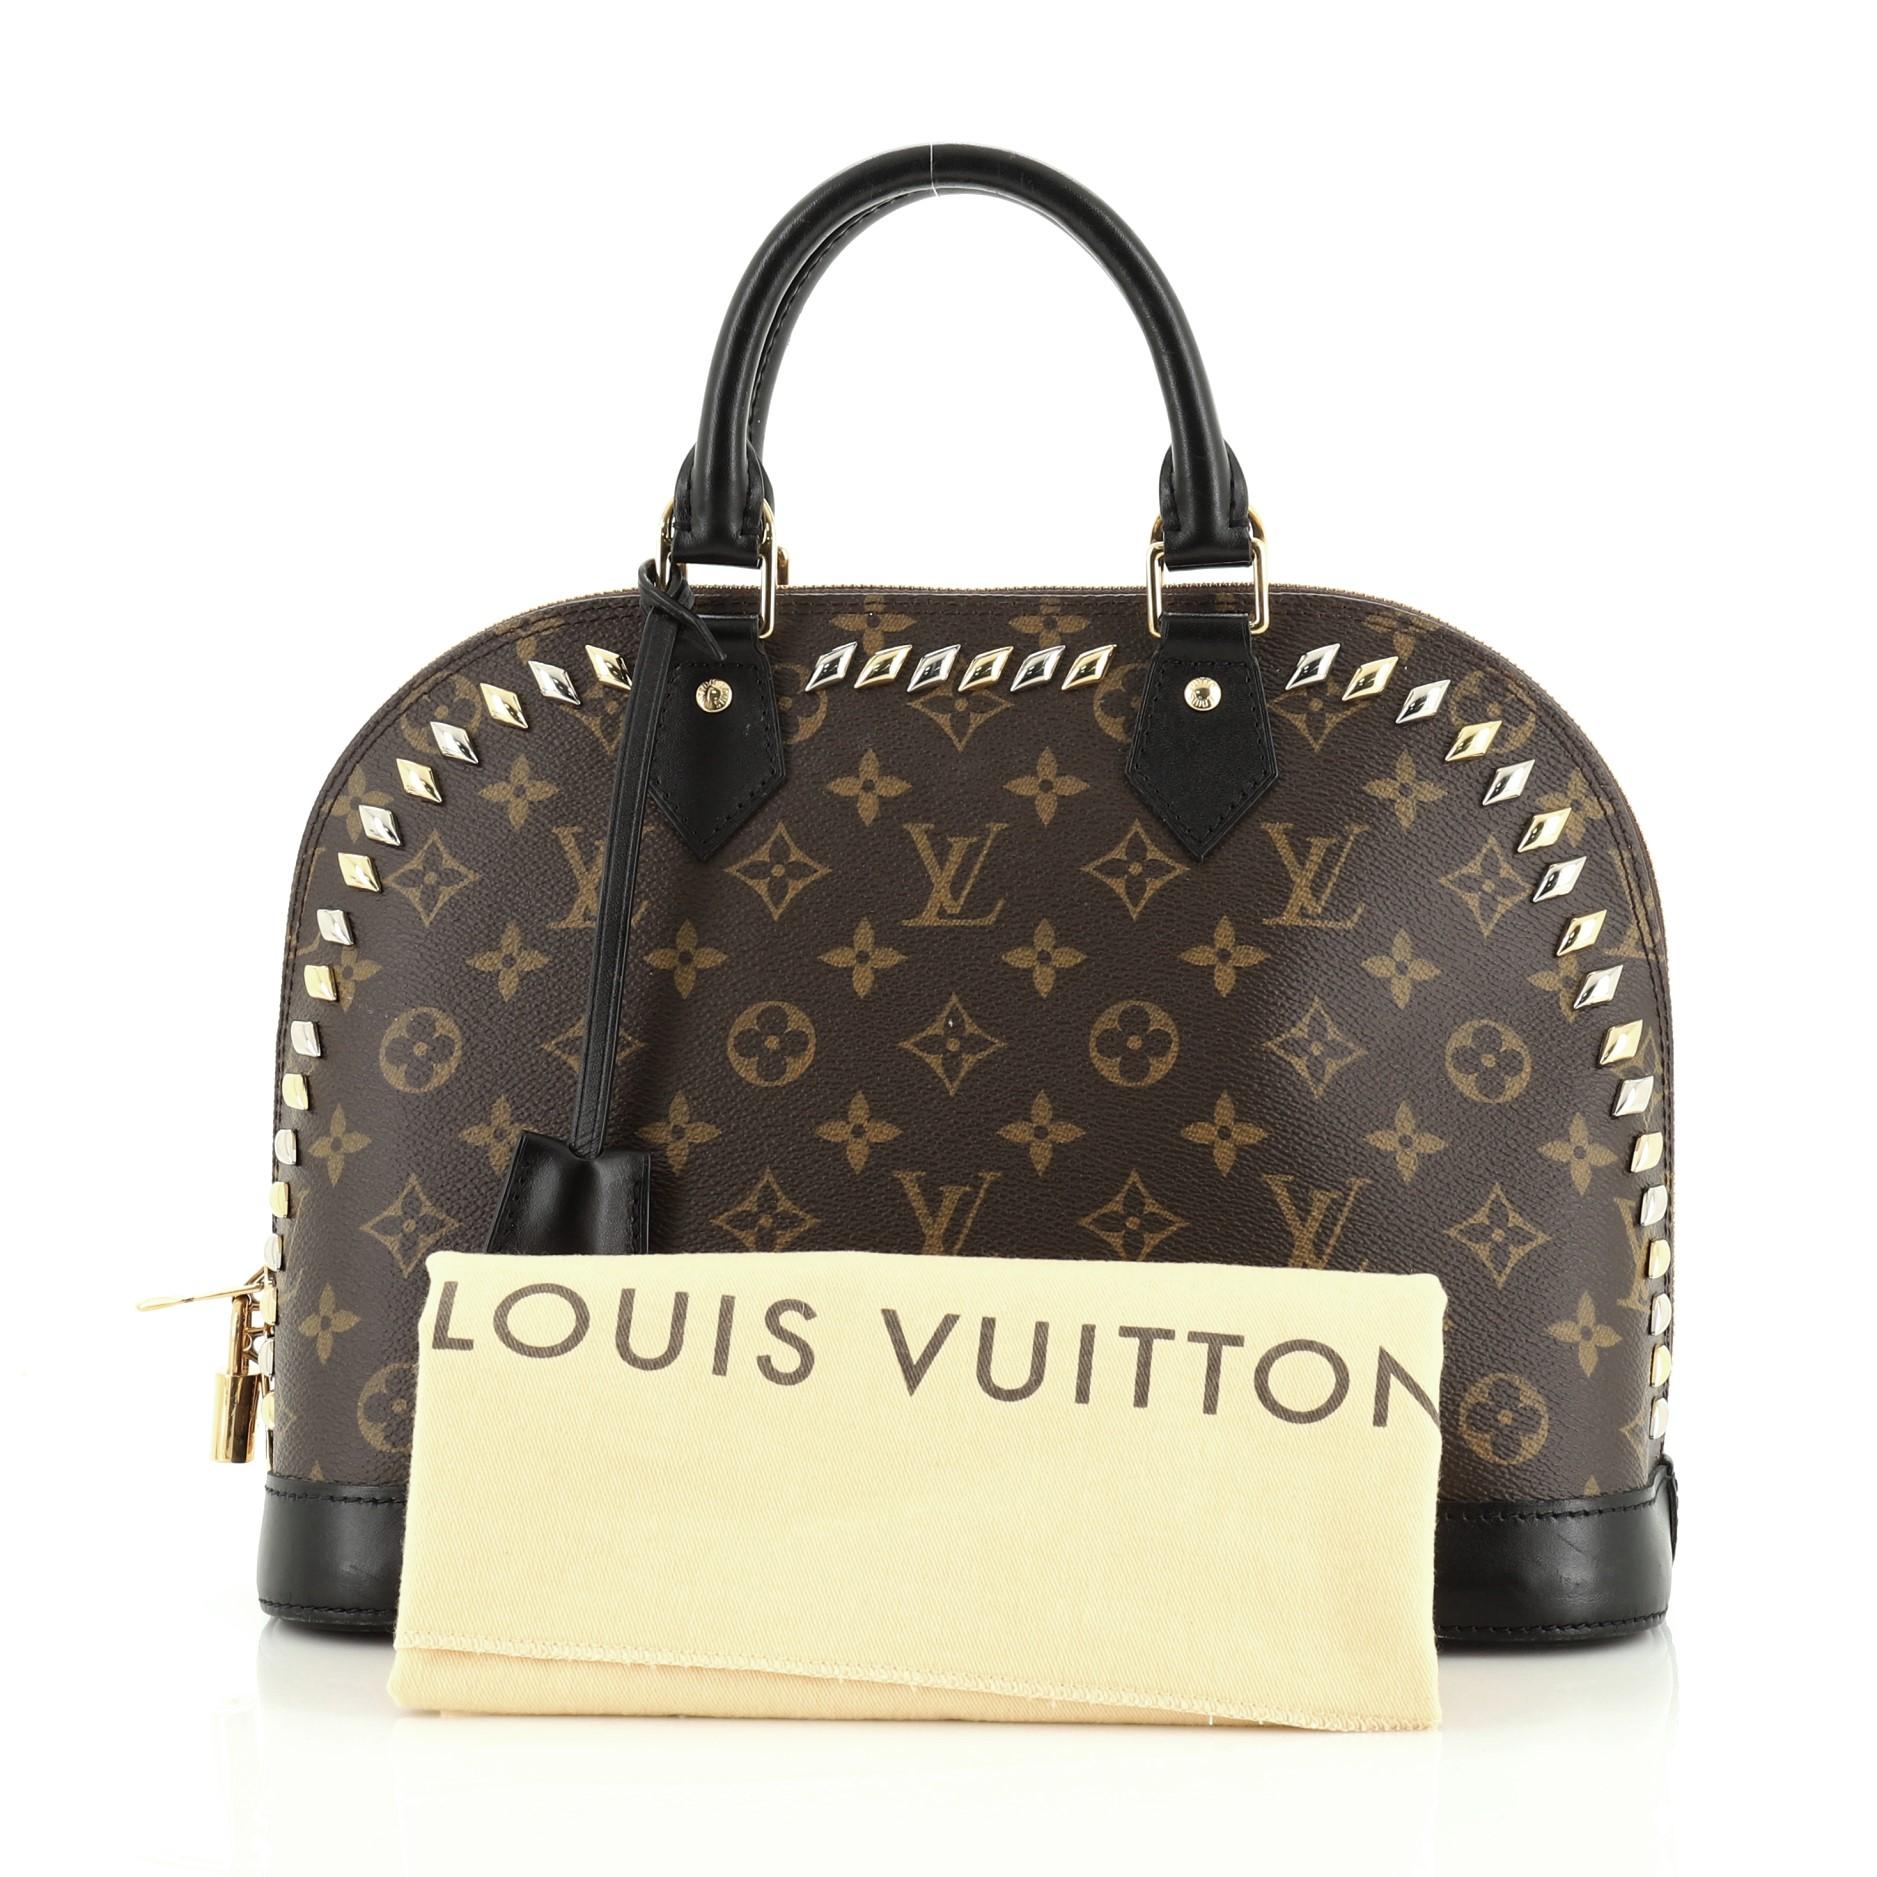 This Louis Vuitton Metal Stones Alma Handbag Studded Monogram Canvas PM, crafted from brown monogram coated canvas, features dual rolled handles, multiple studs, and silver and gold-tone hardware. Its zip closure opens to a brown fabric interior